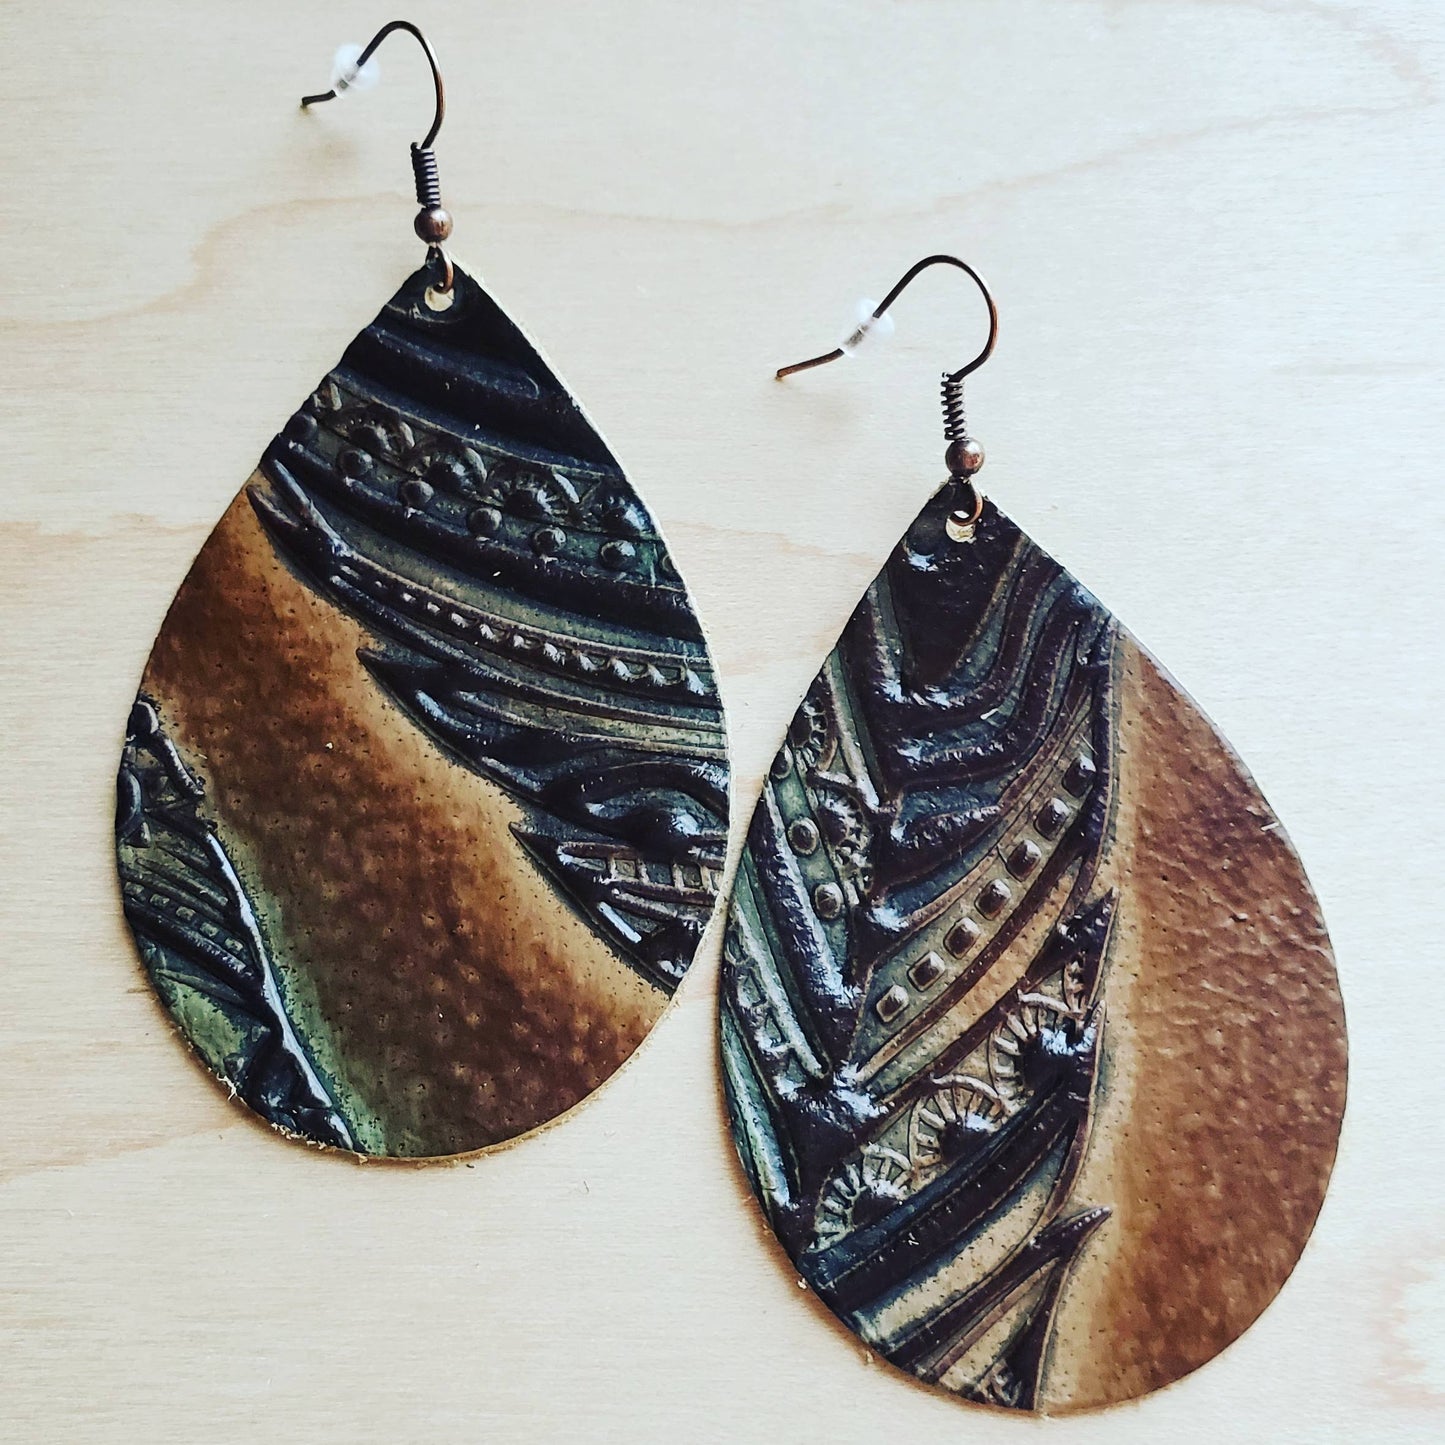 *Leather Teardrop Earrings in Embossed Tan/Turquoise Feathers 224i